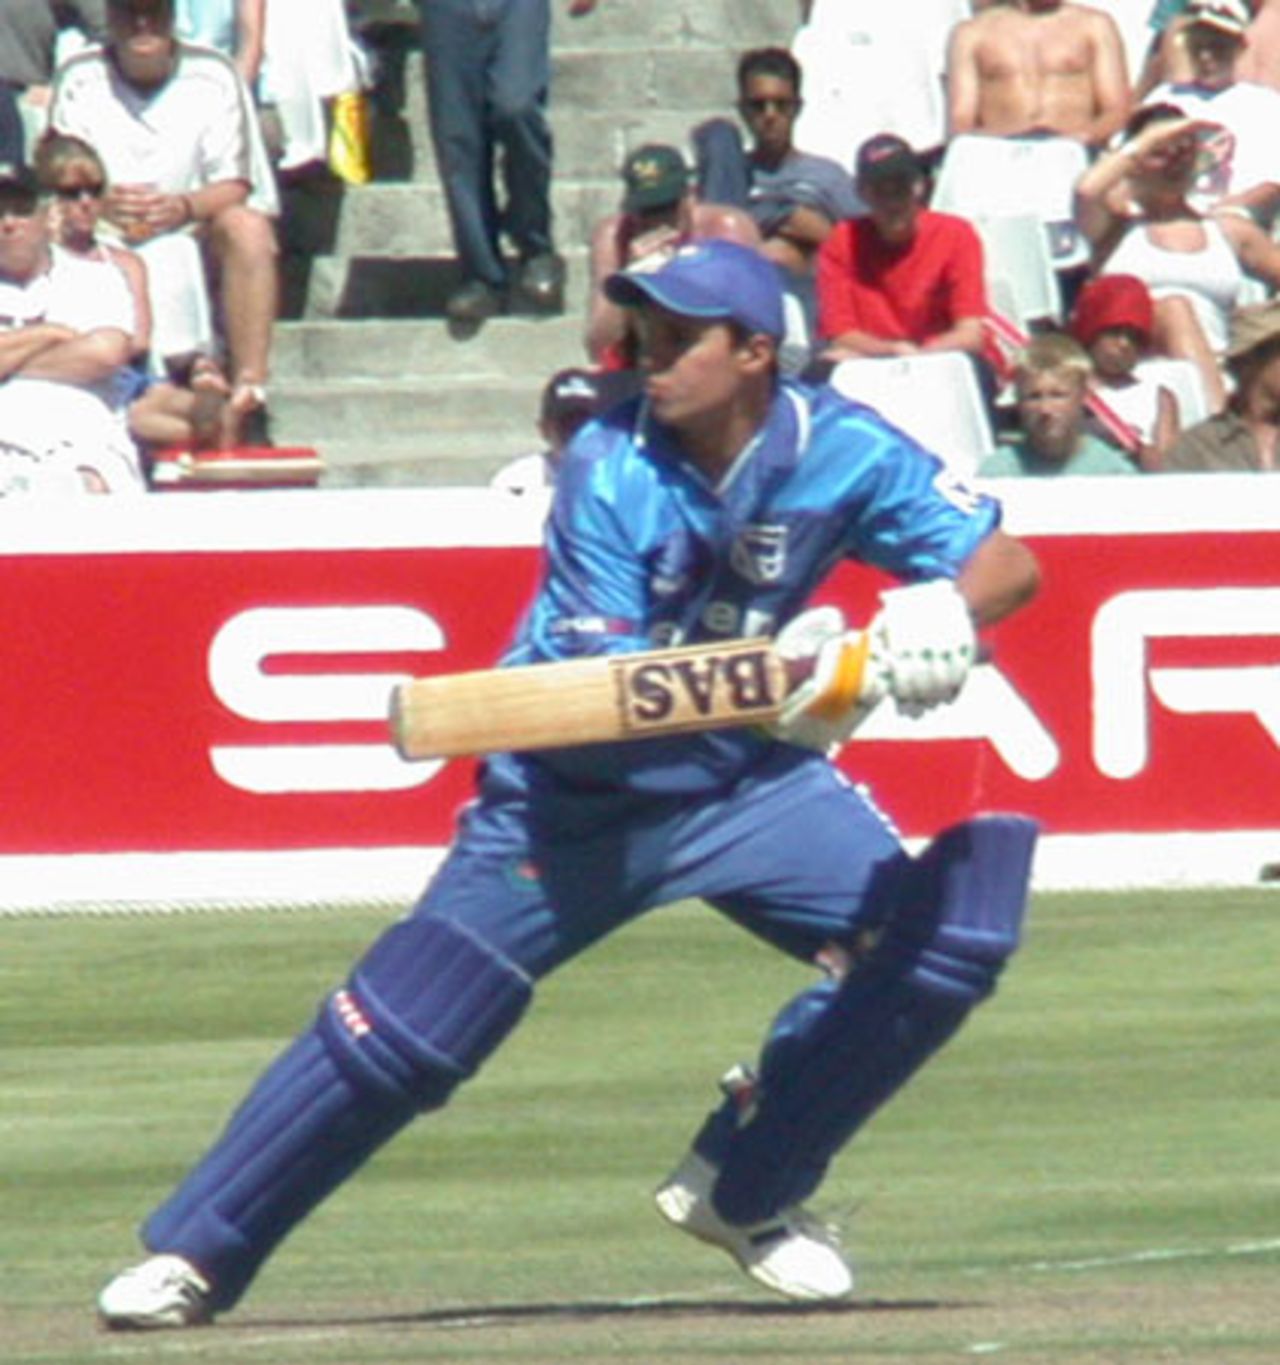 WP's Renier Munnik in action with the bat for WP against the Strikers